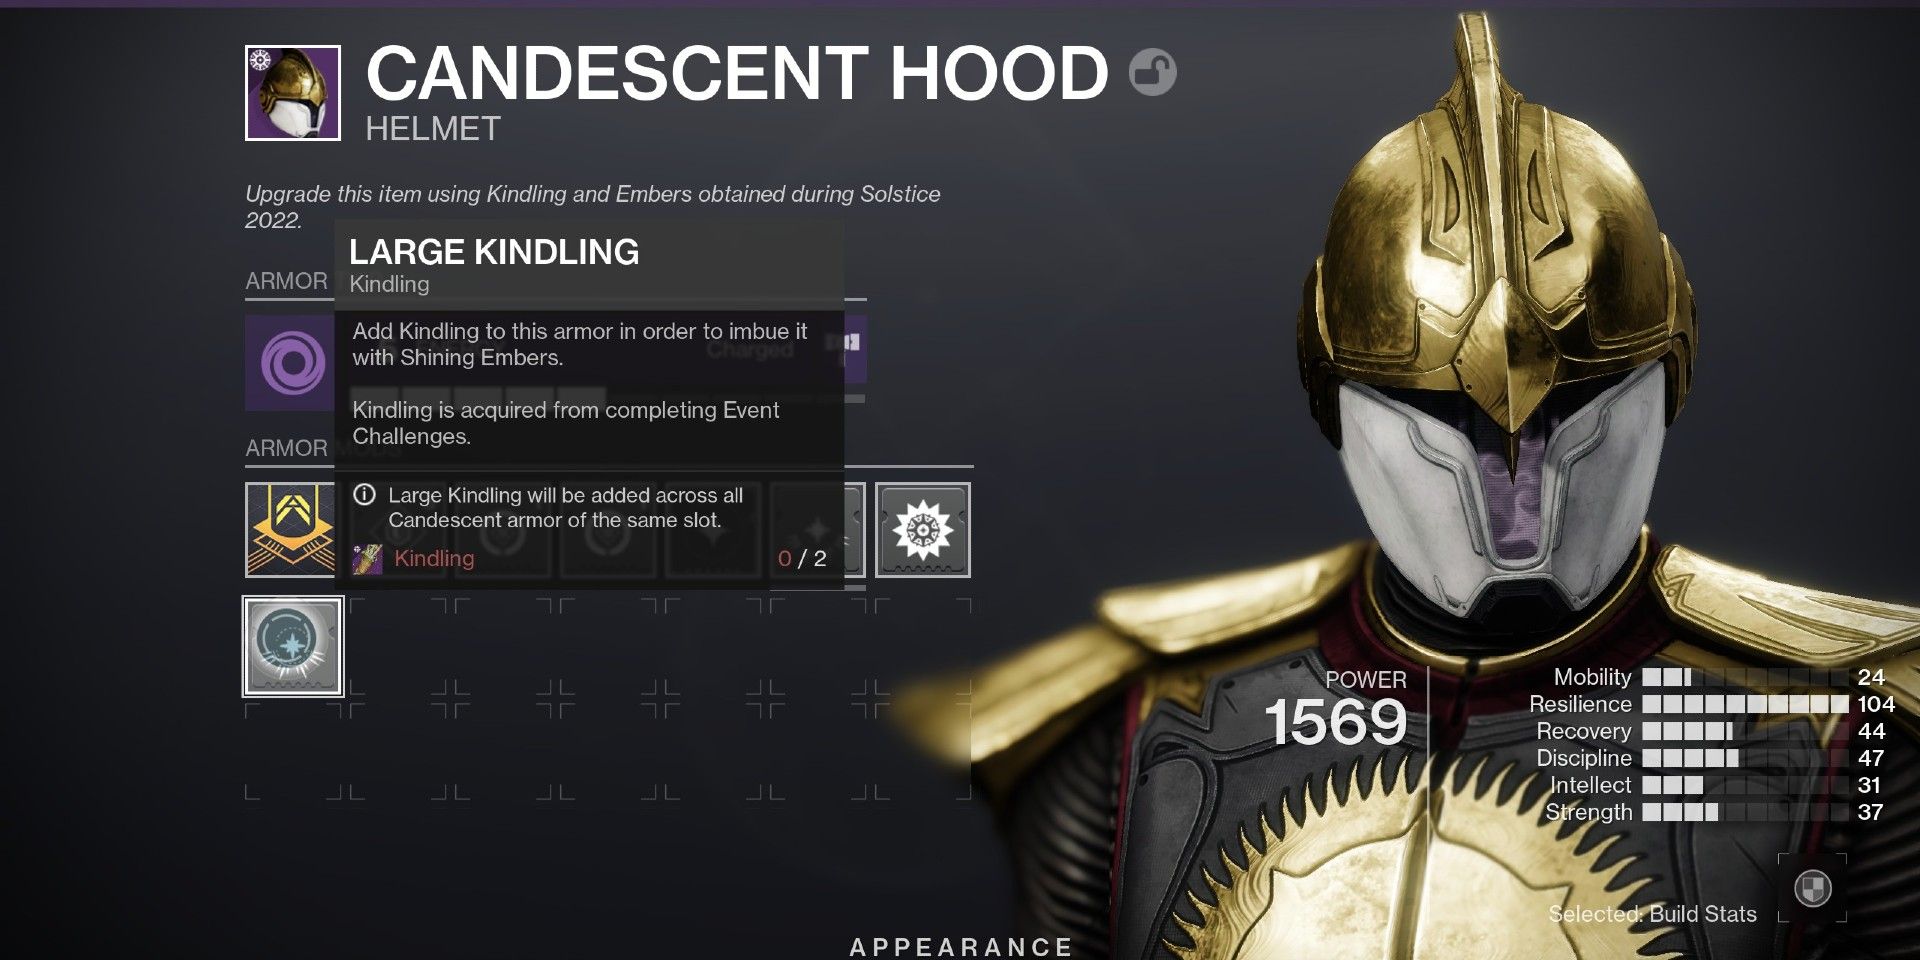 How To Upgrade The Candescent Armor In Destiny 2